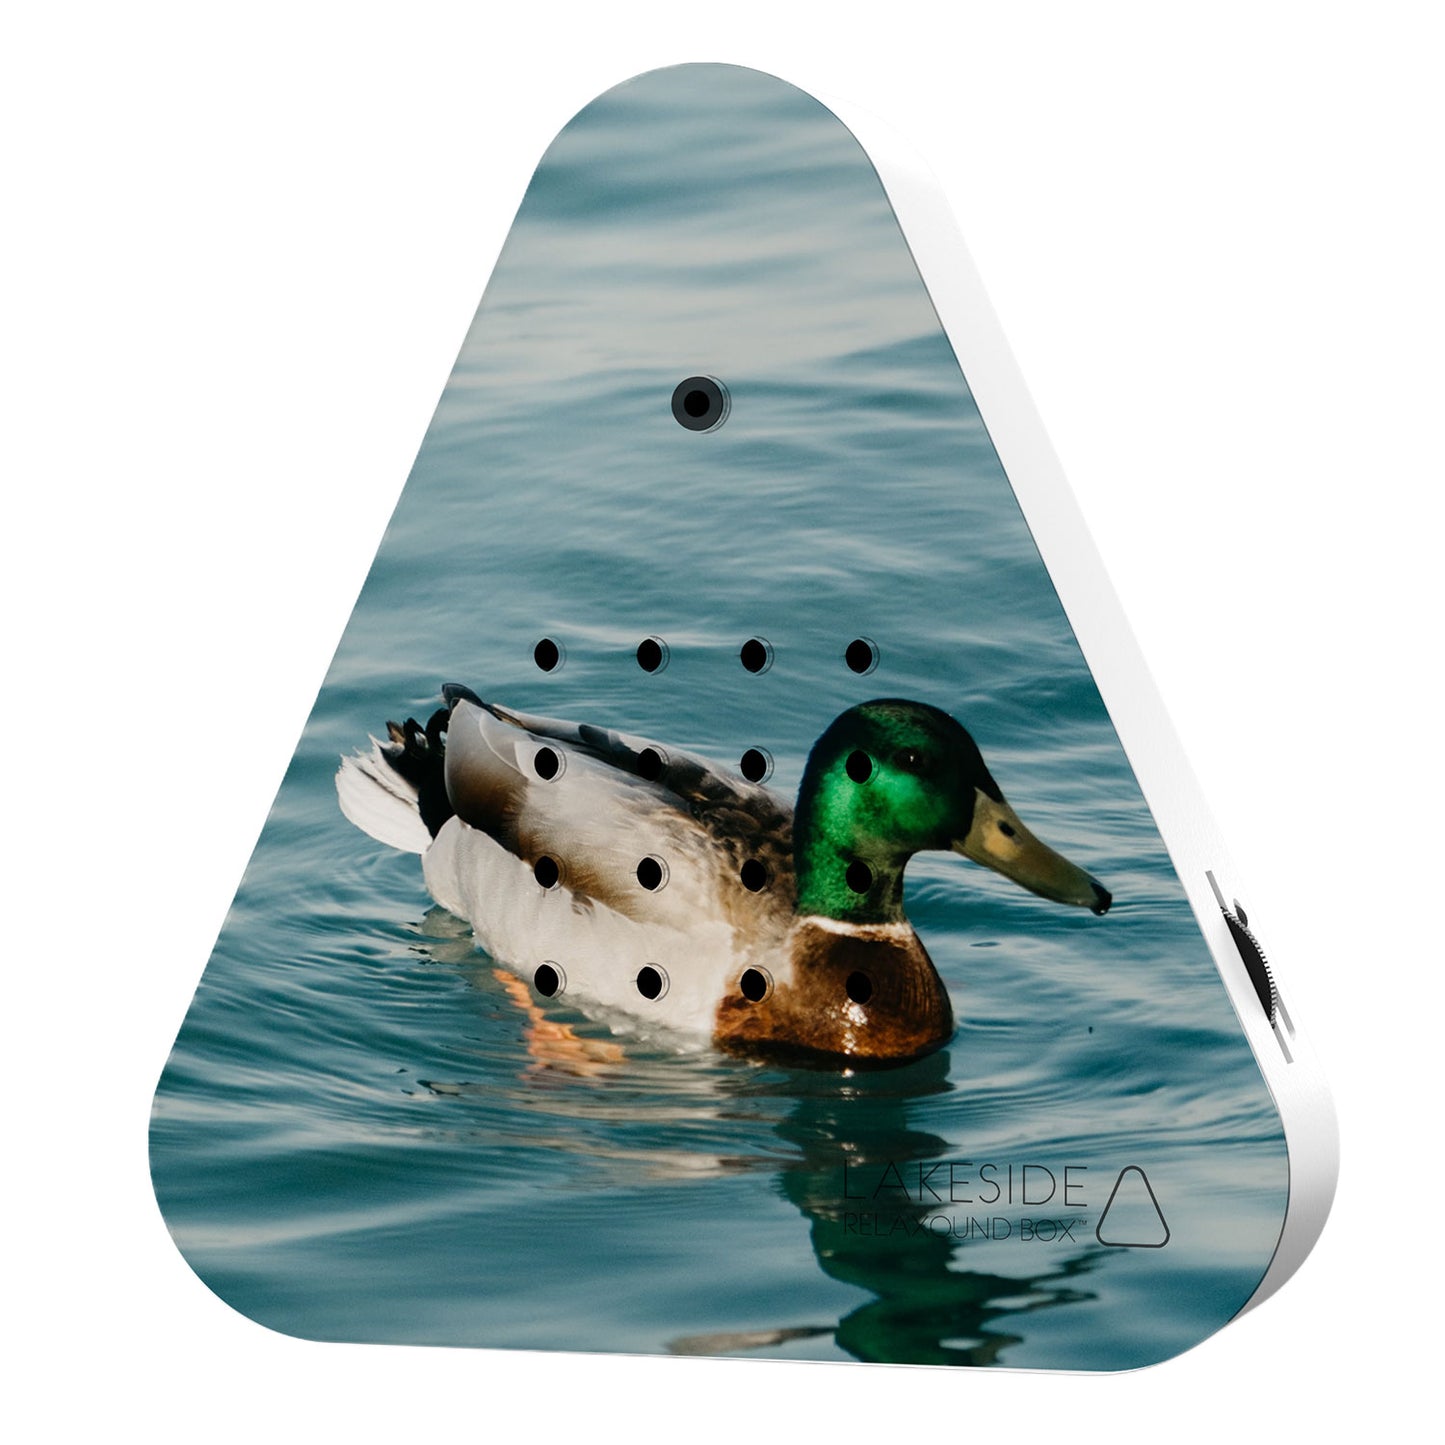 Nyhed! Lake side Limited edition - Wild Duck